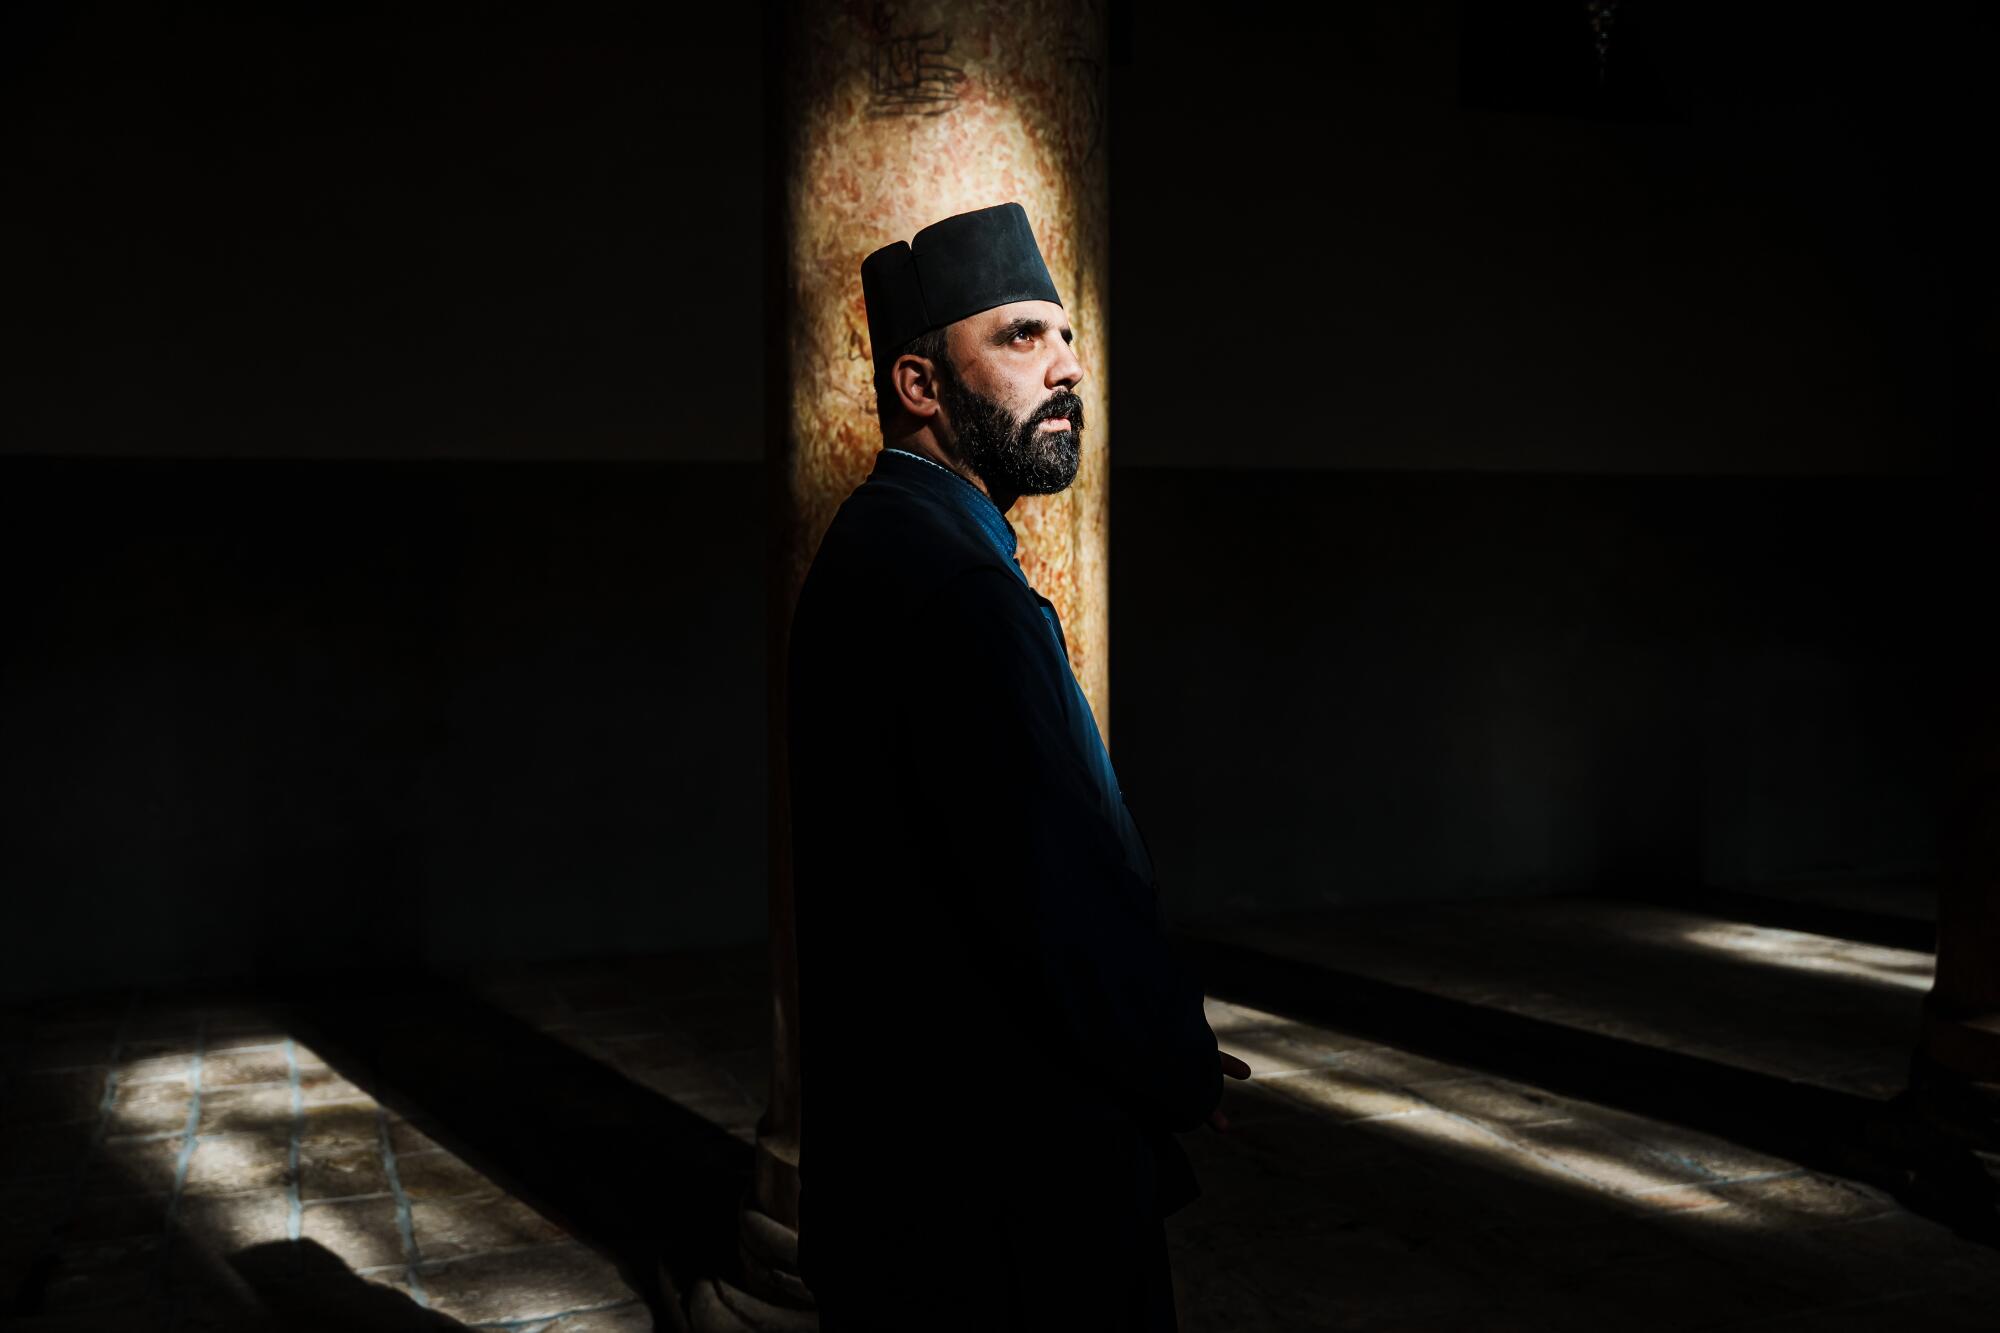 Father Issa Thaljieh poses for a portrait inside the Church of the Nativity in Bethlehem